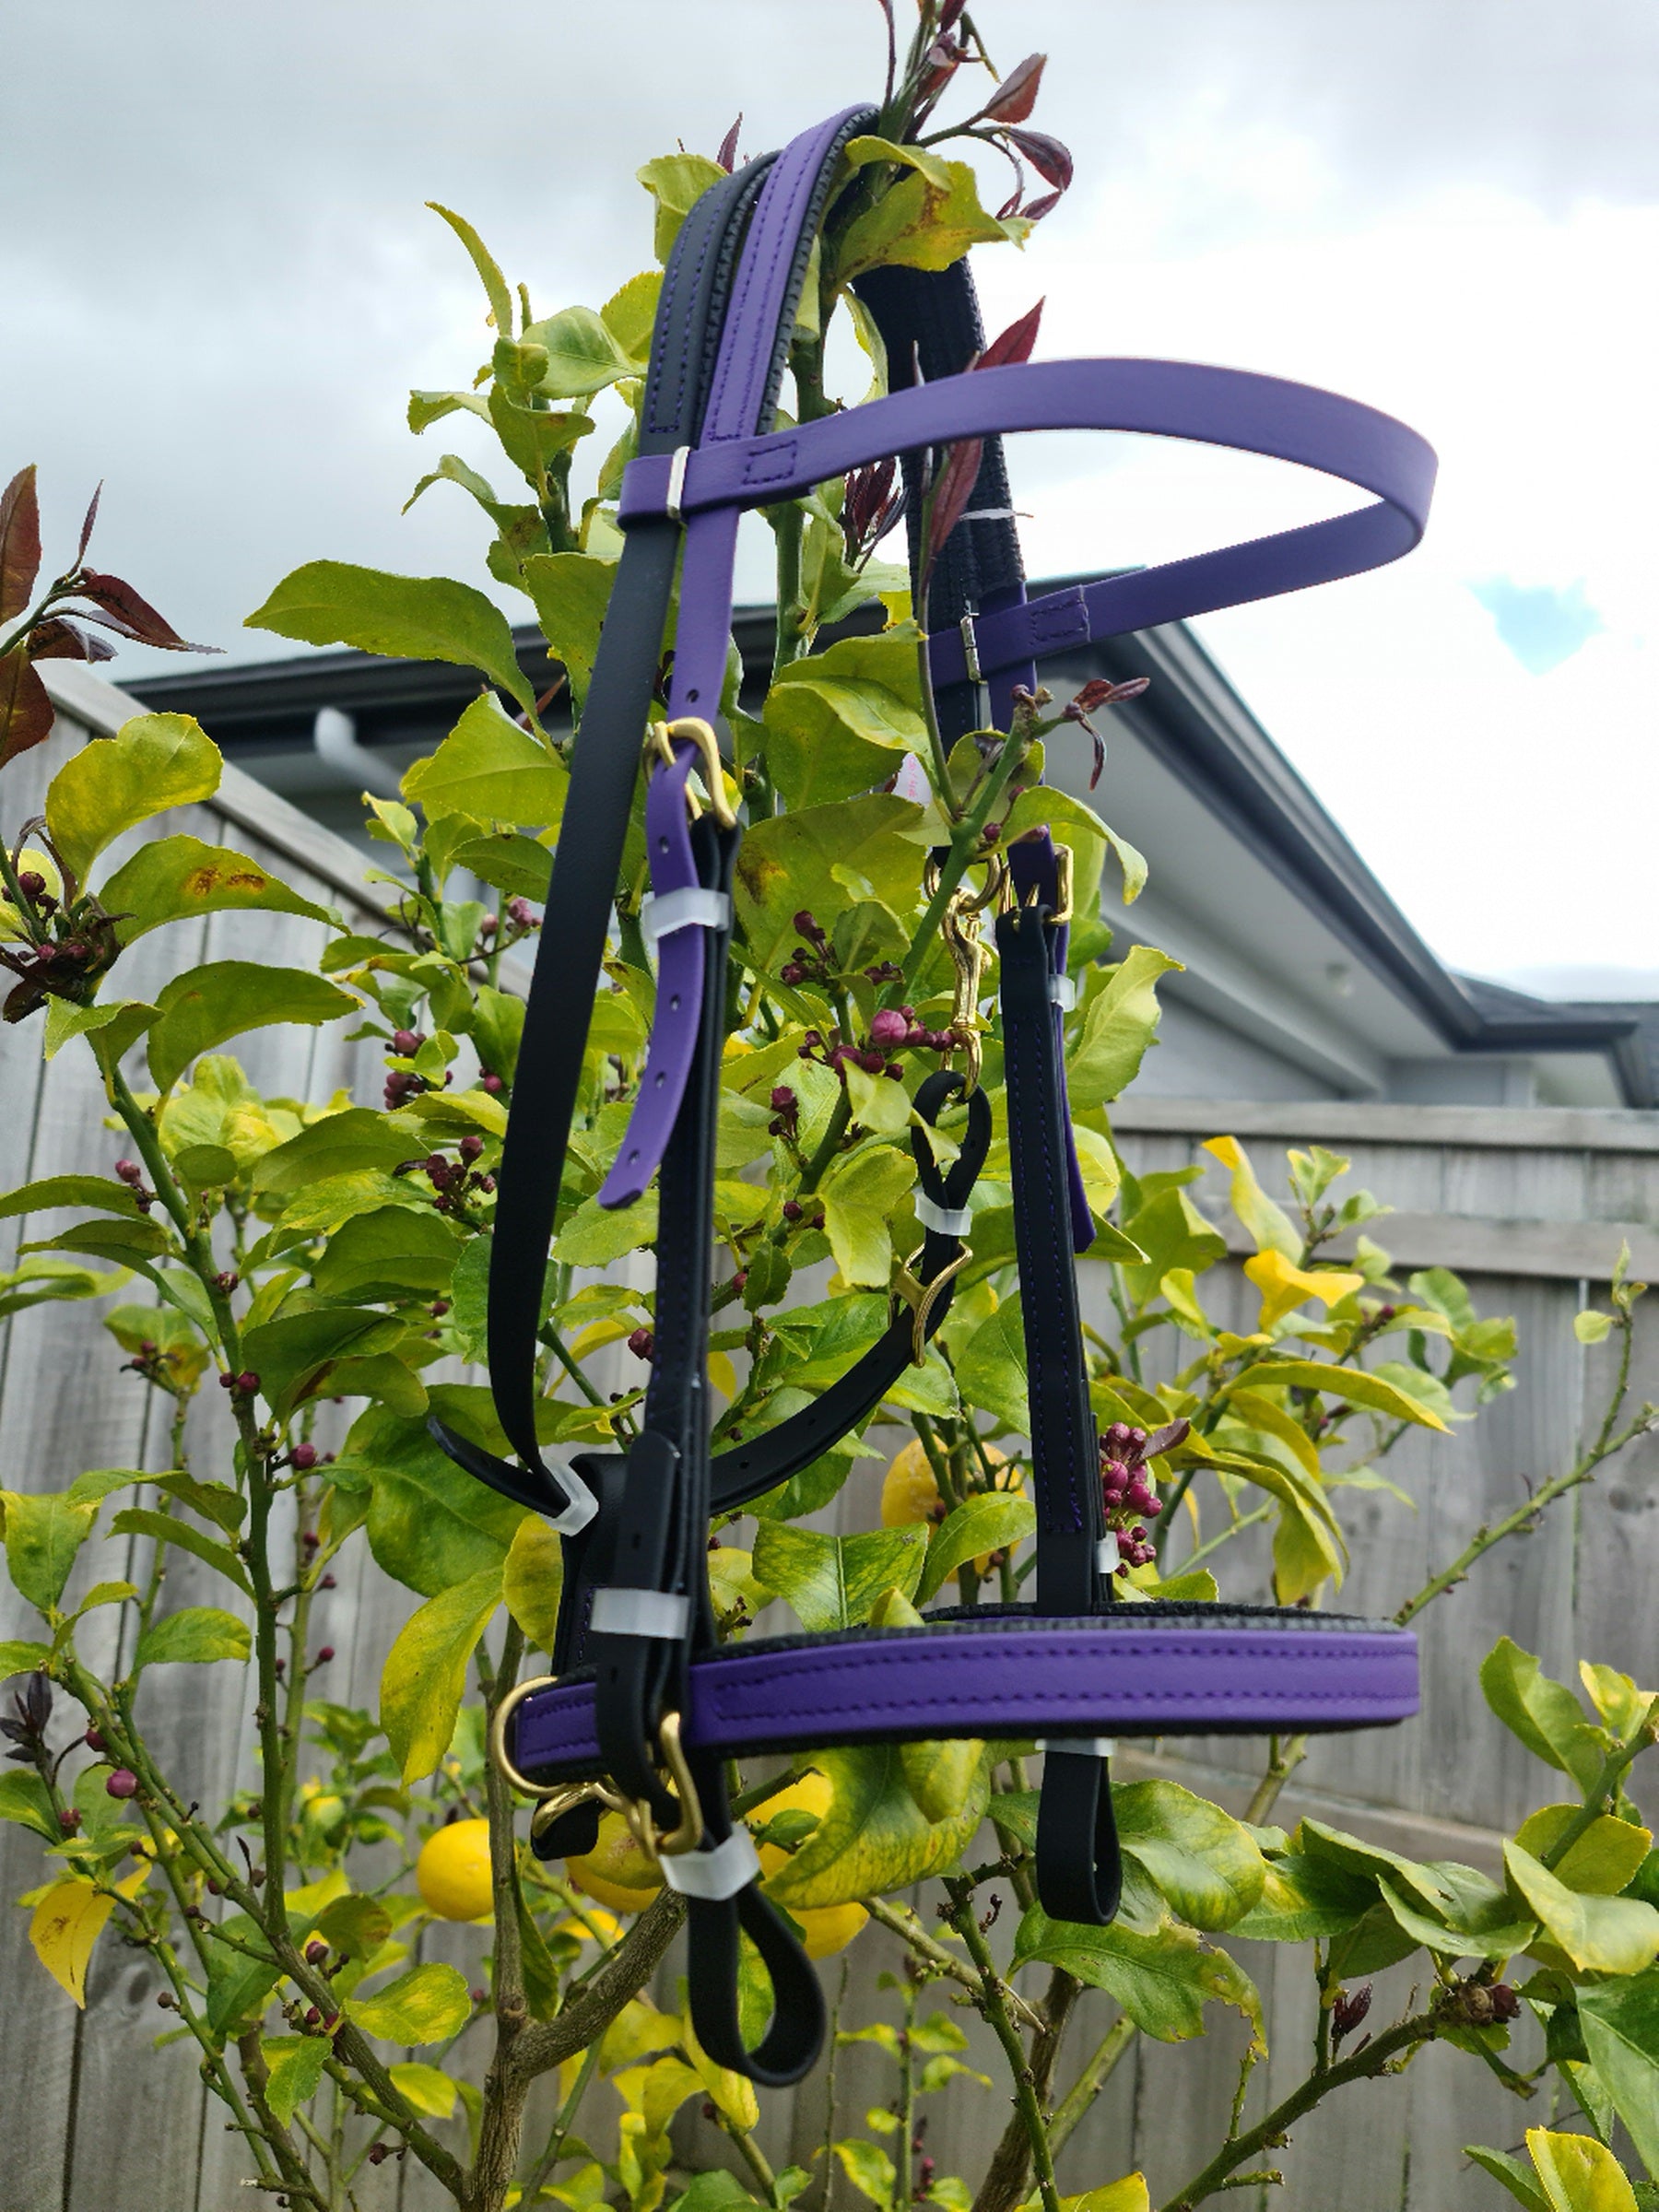 A purple and black LS Equestrian Simplicity Bridle - Black & Violet is hanging on a branch of a tree. The background shows a wooden fence, green leaves, and a cloudy sky.